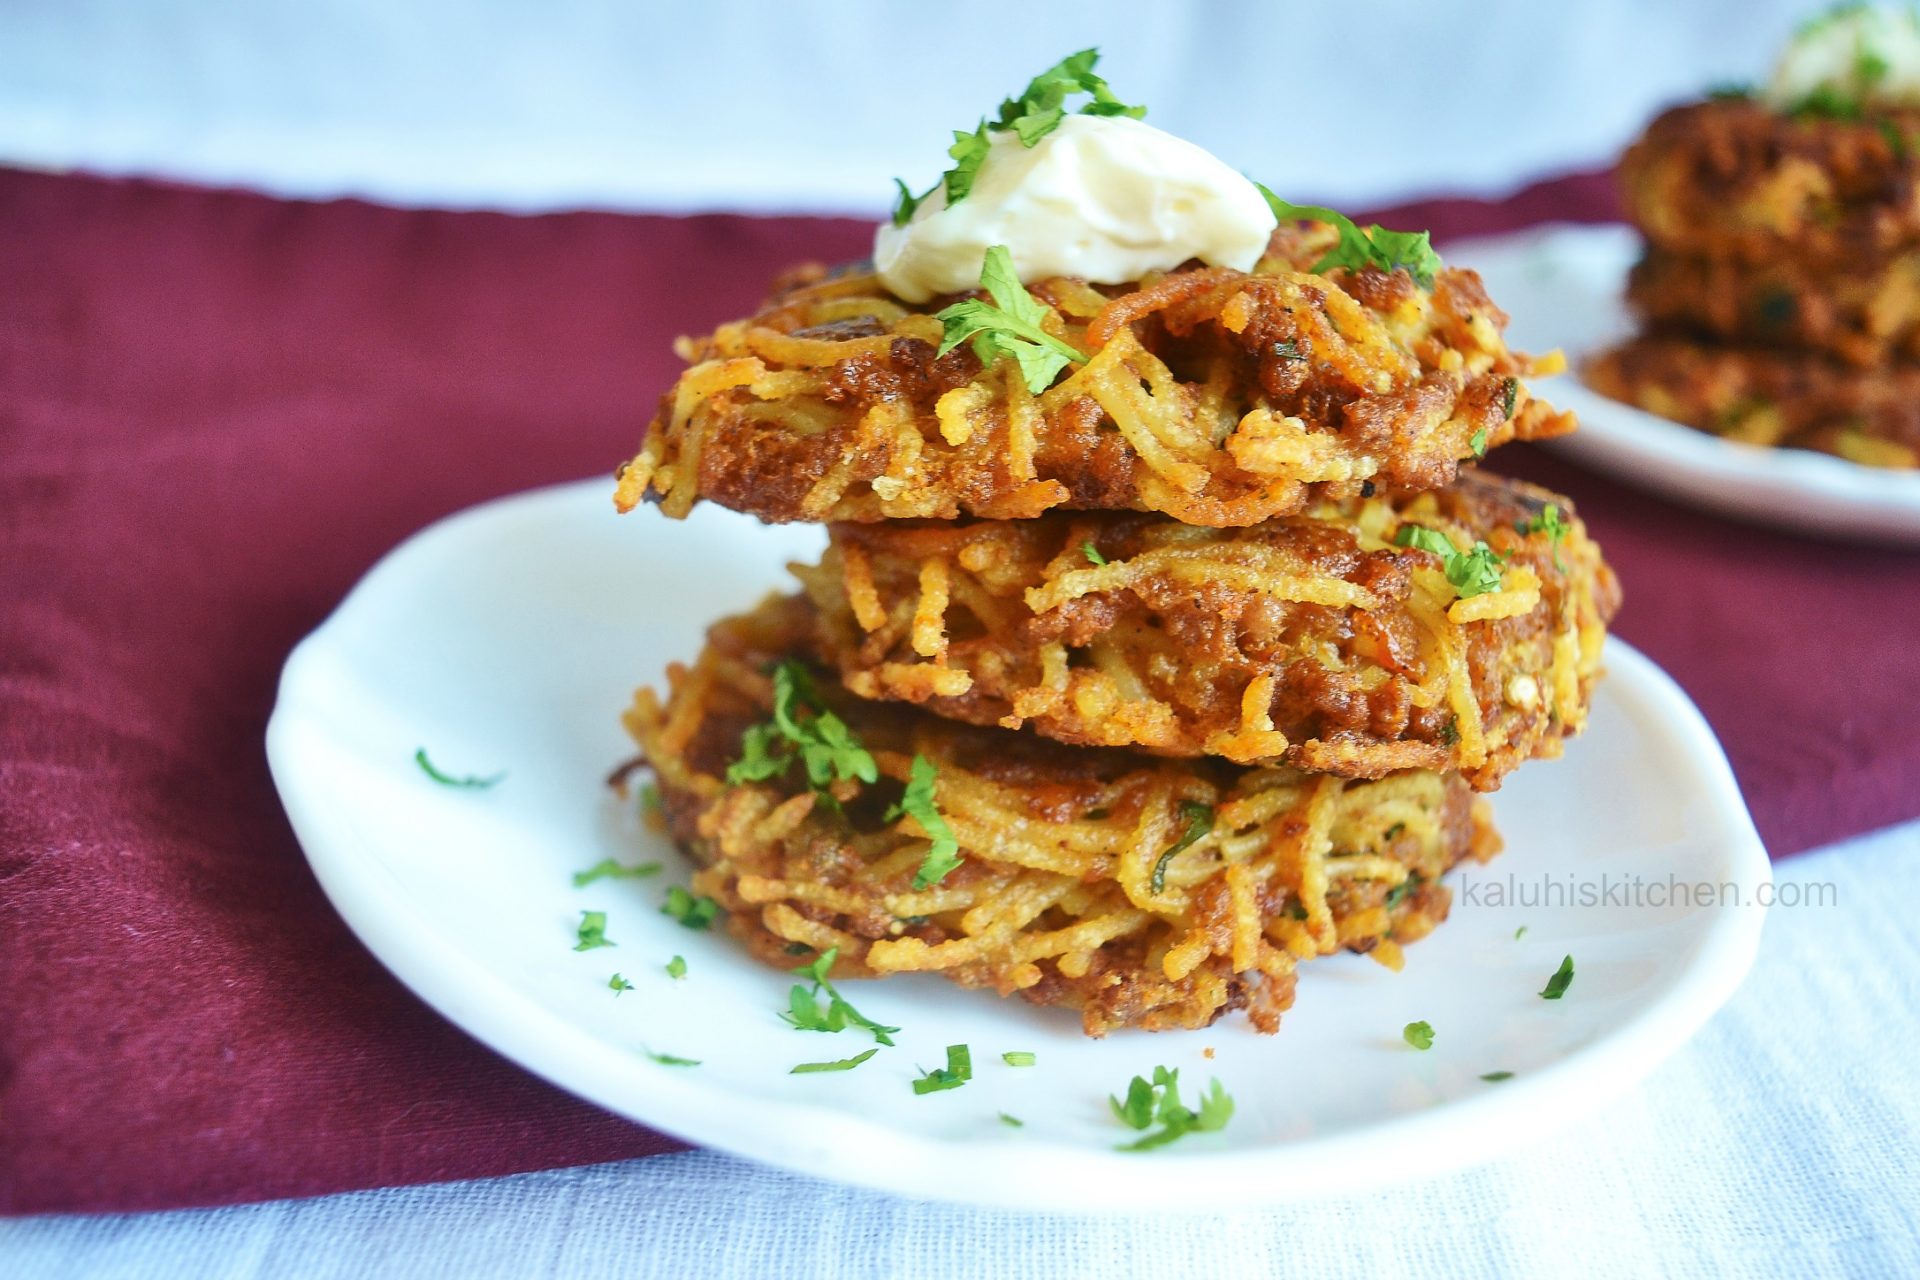 African Food Bloggers_Kenyan food Bloggers_ginger and chilli spaghetti fritters_kaluhiskitchen.com